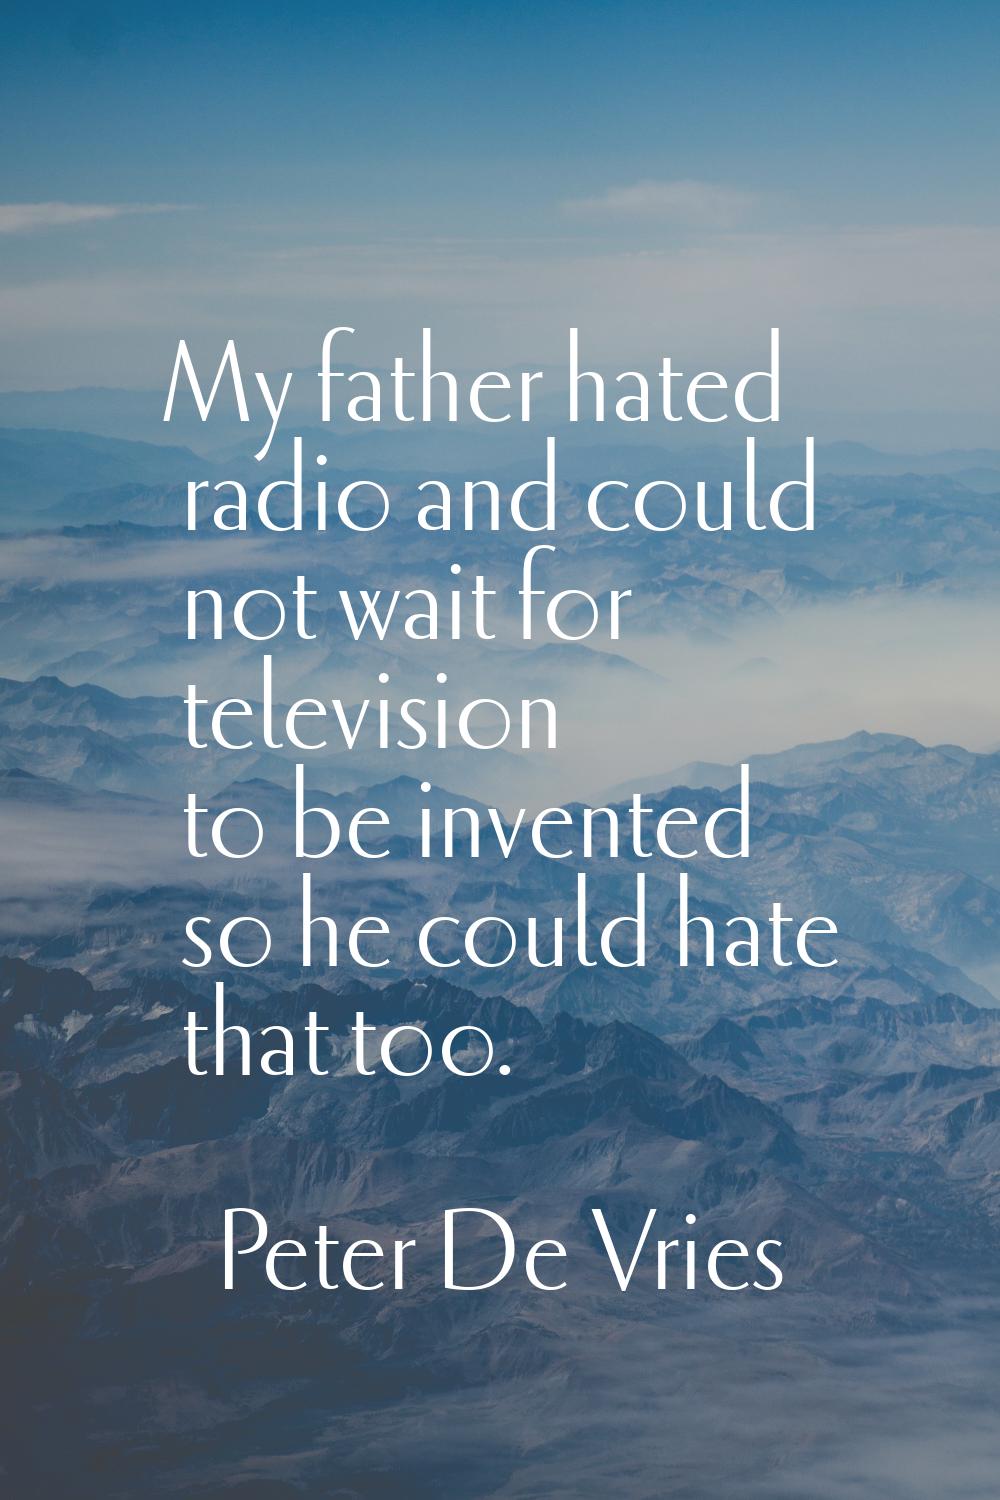 My father hated radio and could not wait for television to be invented so he could hate that too.